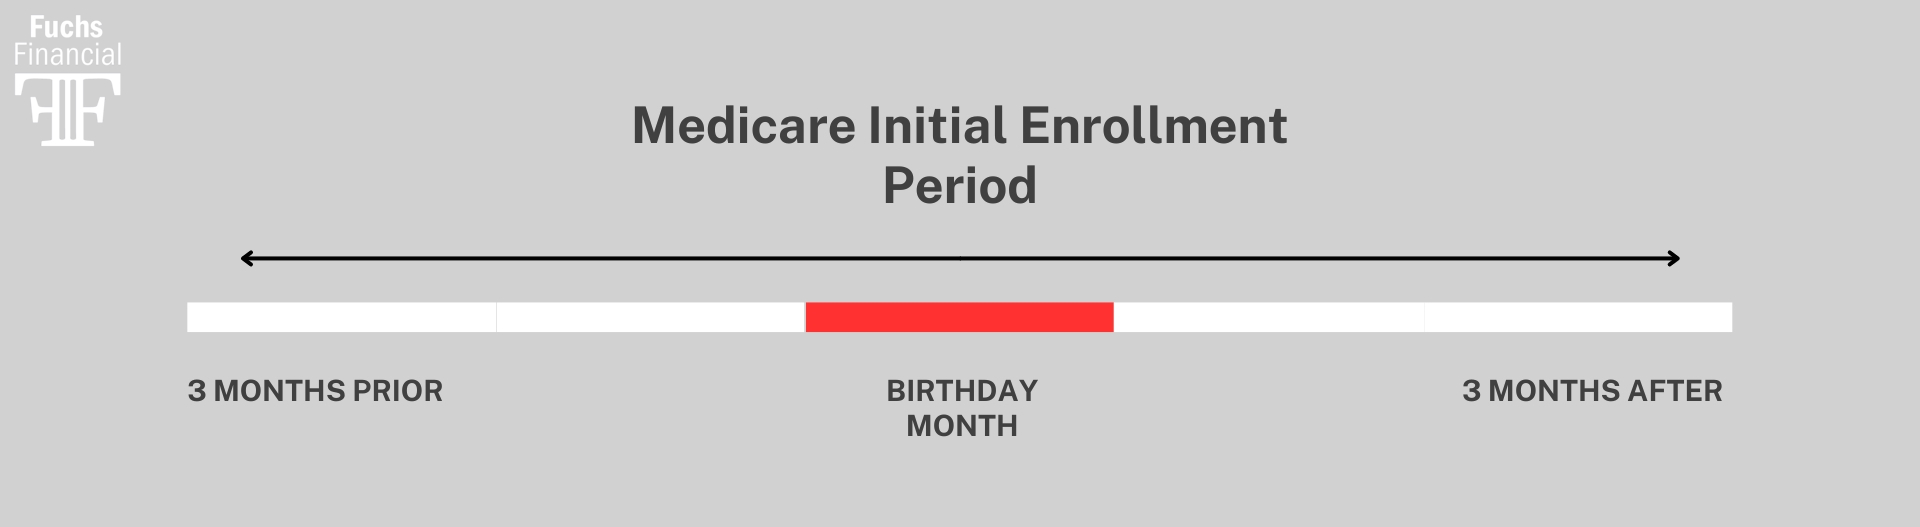 Visual Graphic/Table of the Medicare Initial Enrollment Periods.